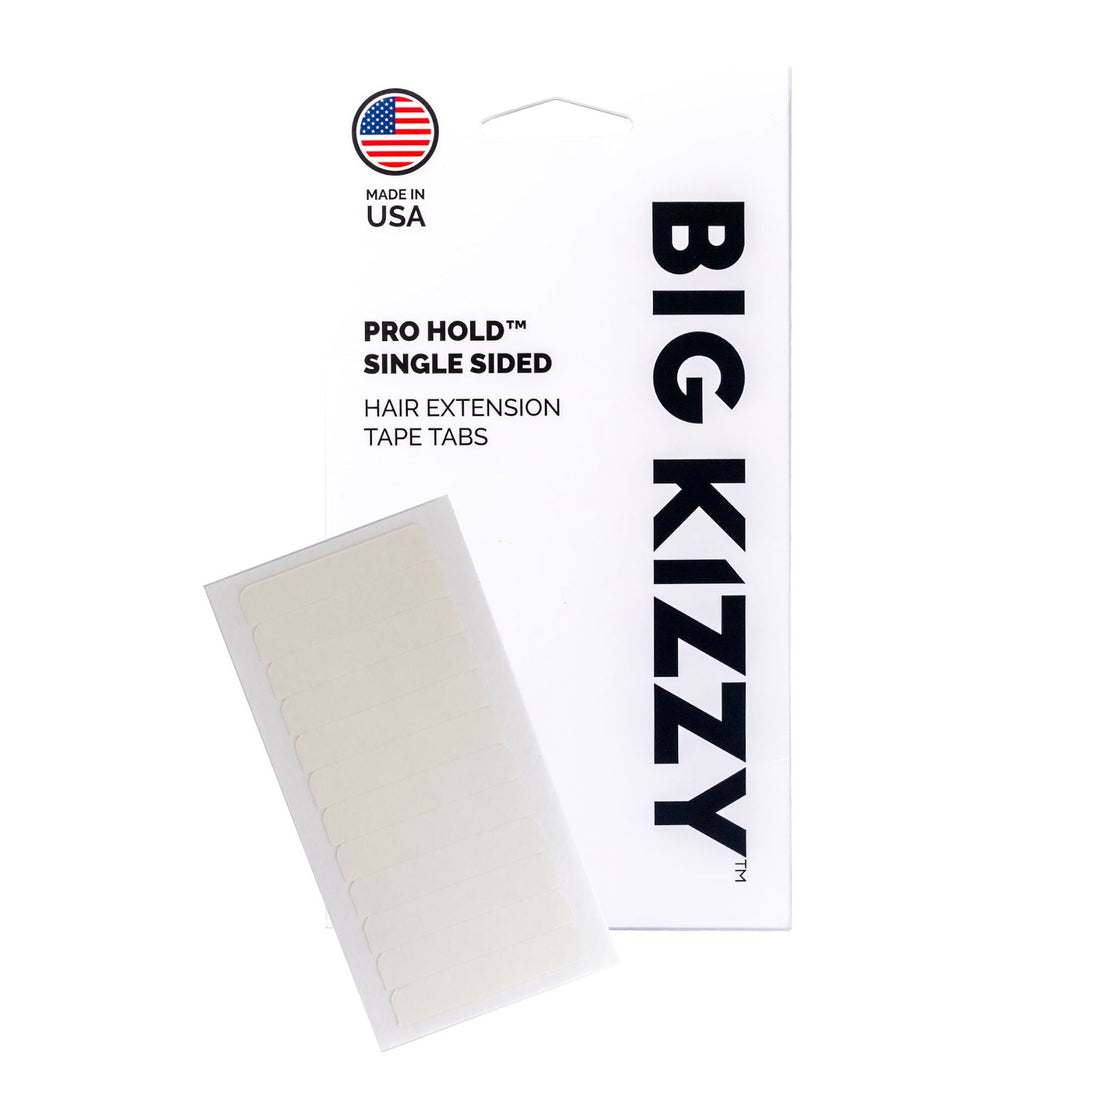 A pack of Big Kizzy® Pro Hold Single Sided Hair Extension Replacement Tape Tabs with a sheet of white single sided tape tabs overlayed on top of it